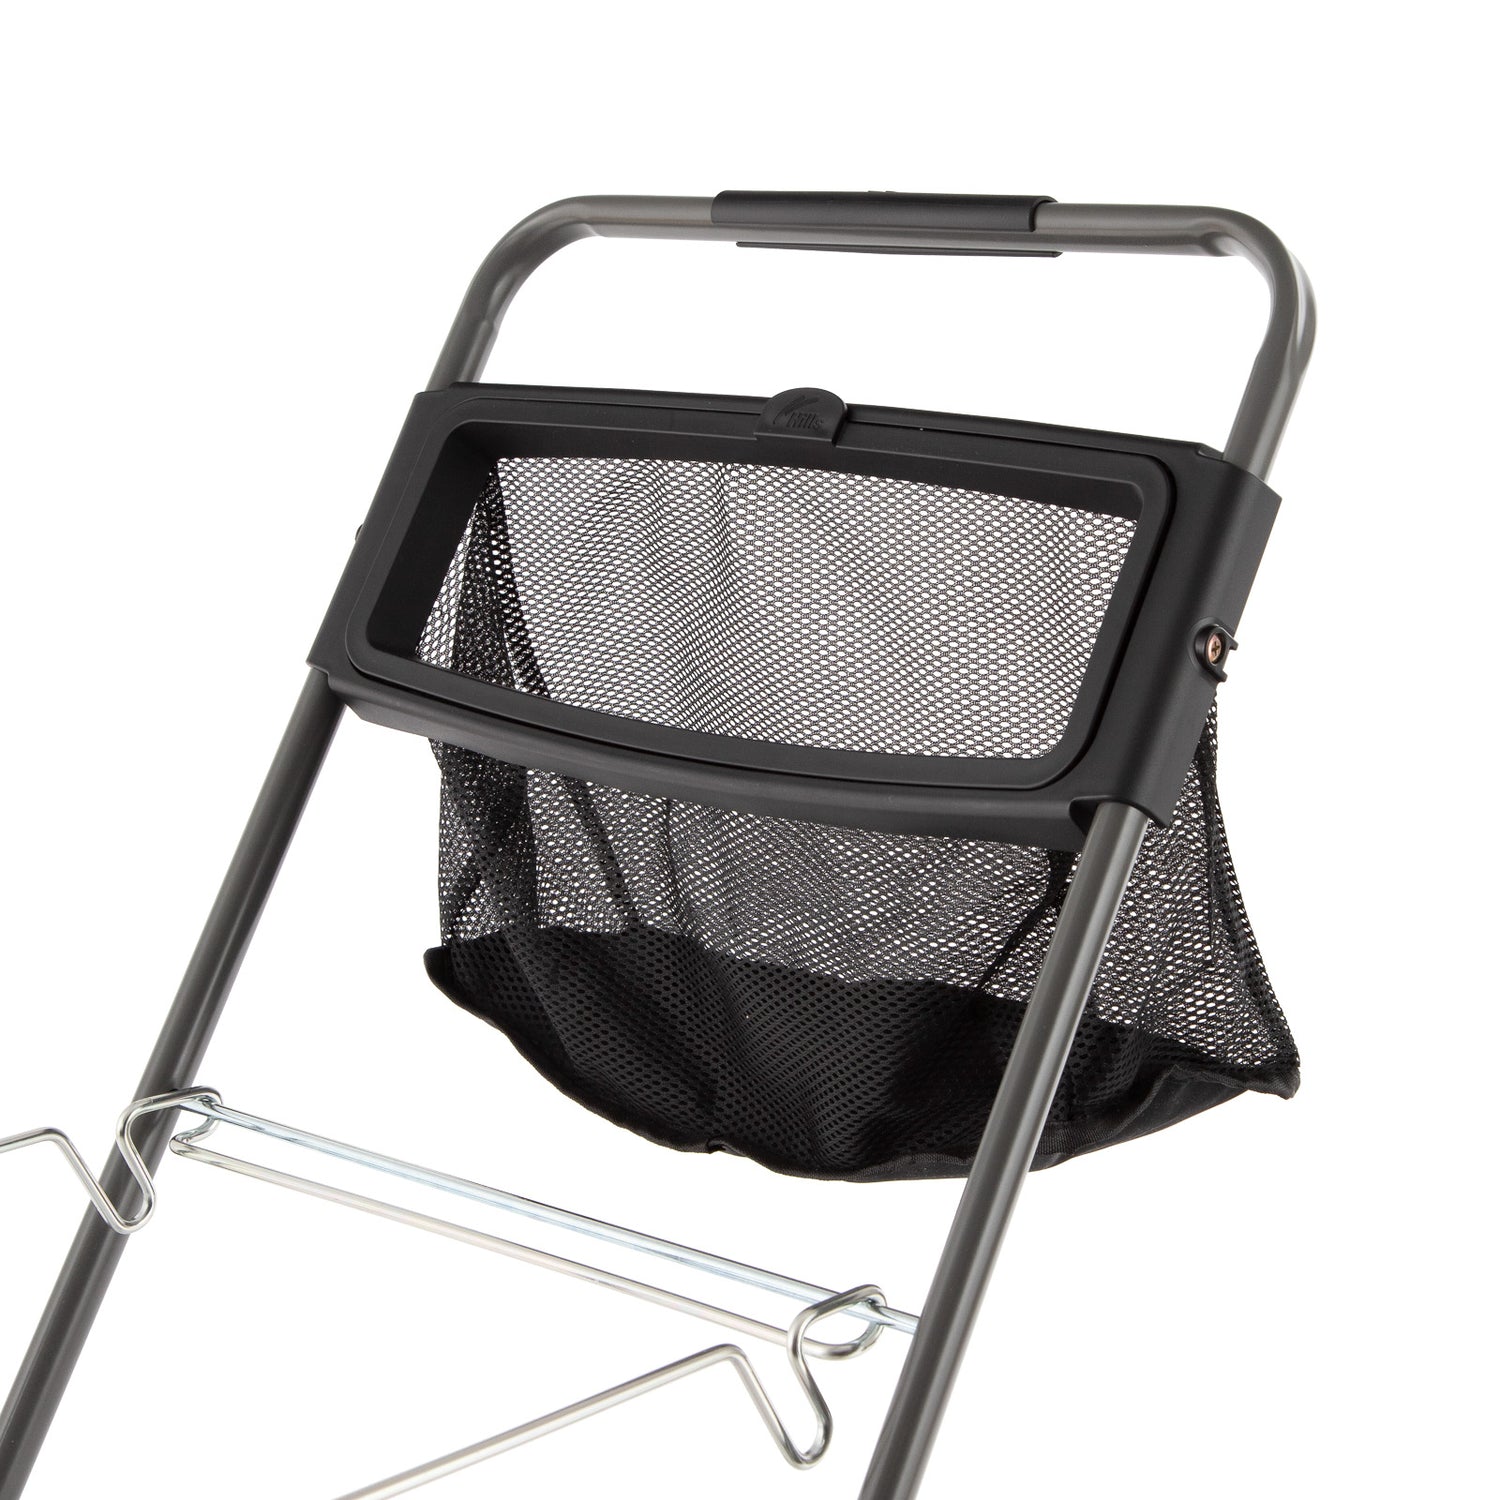 Extra Tall Premium Laundry Trolley